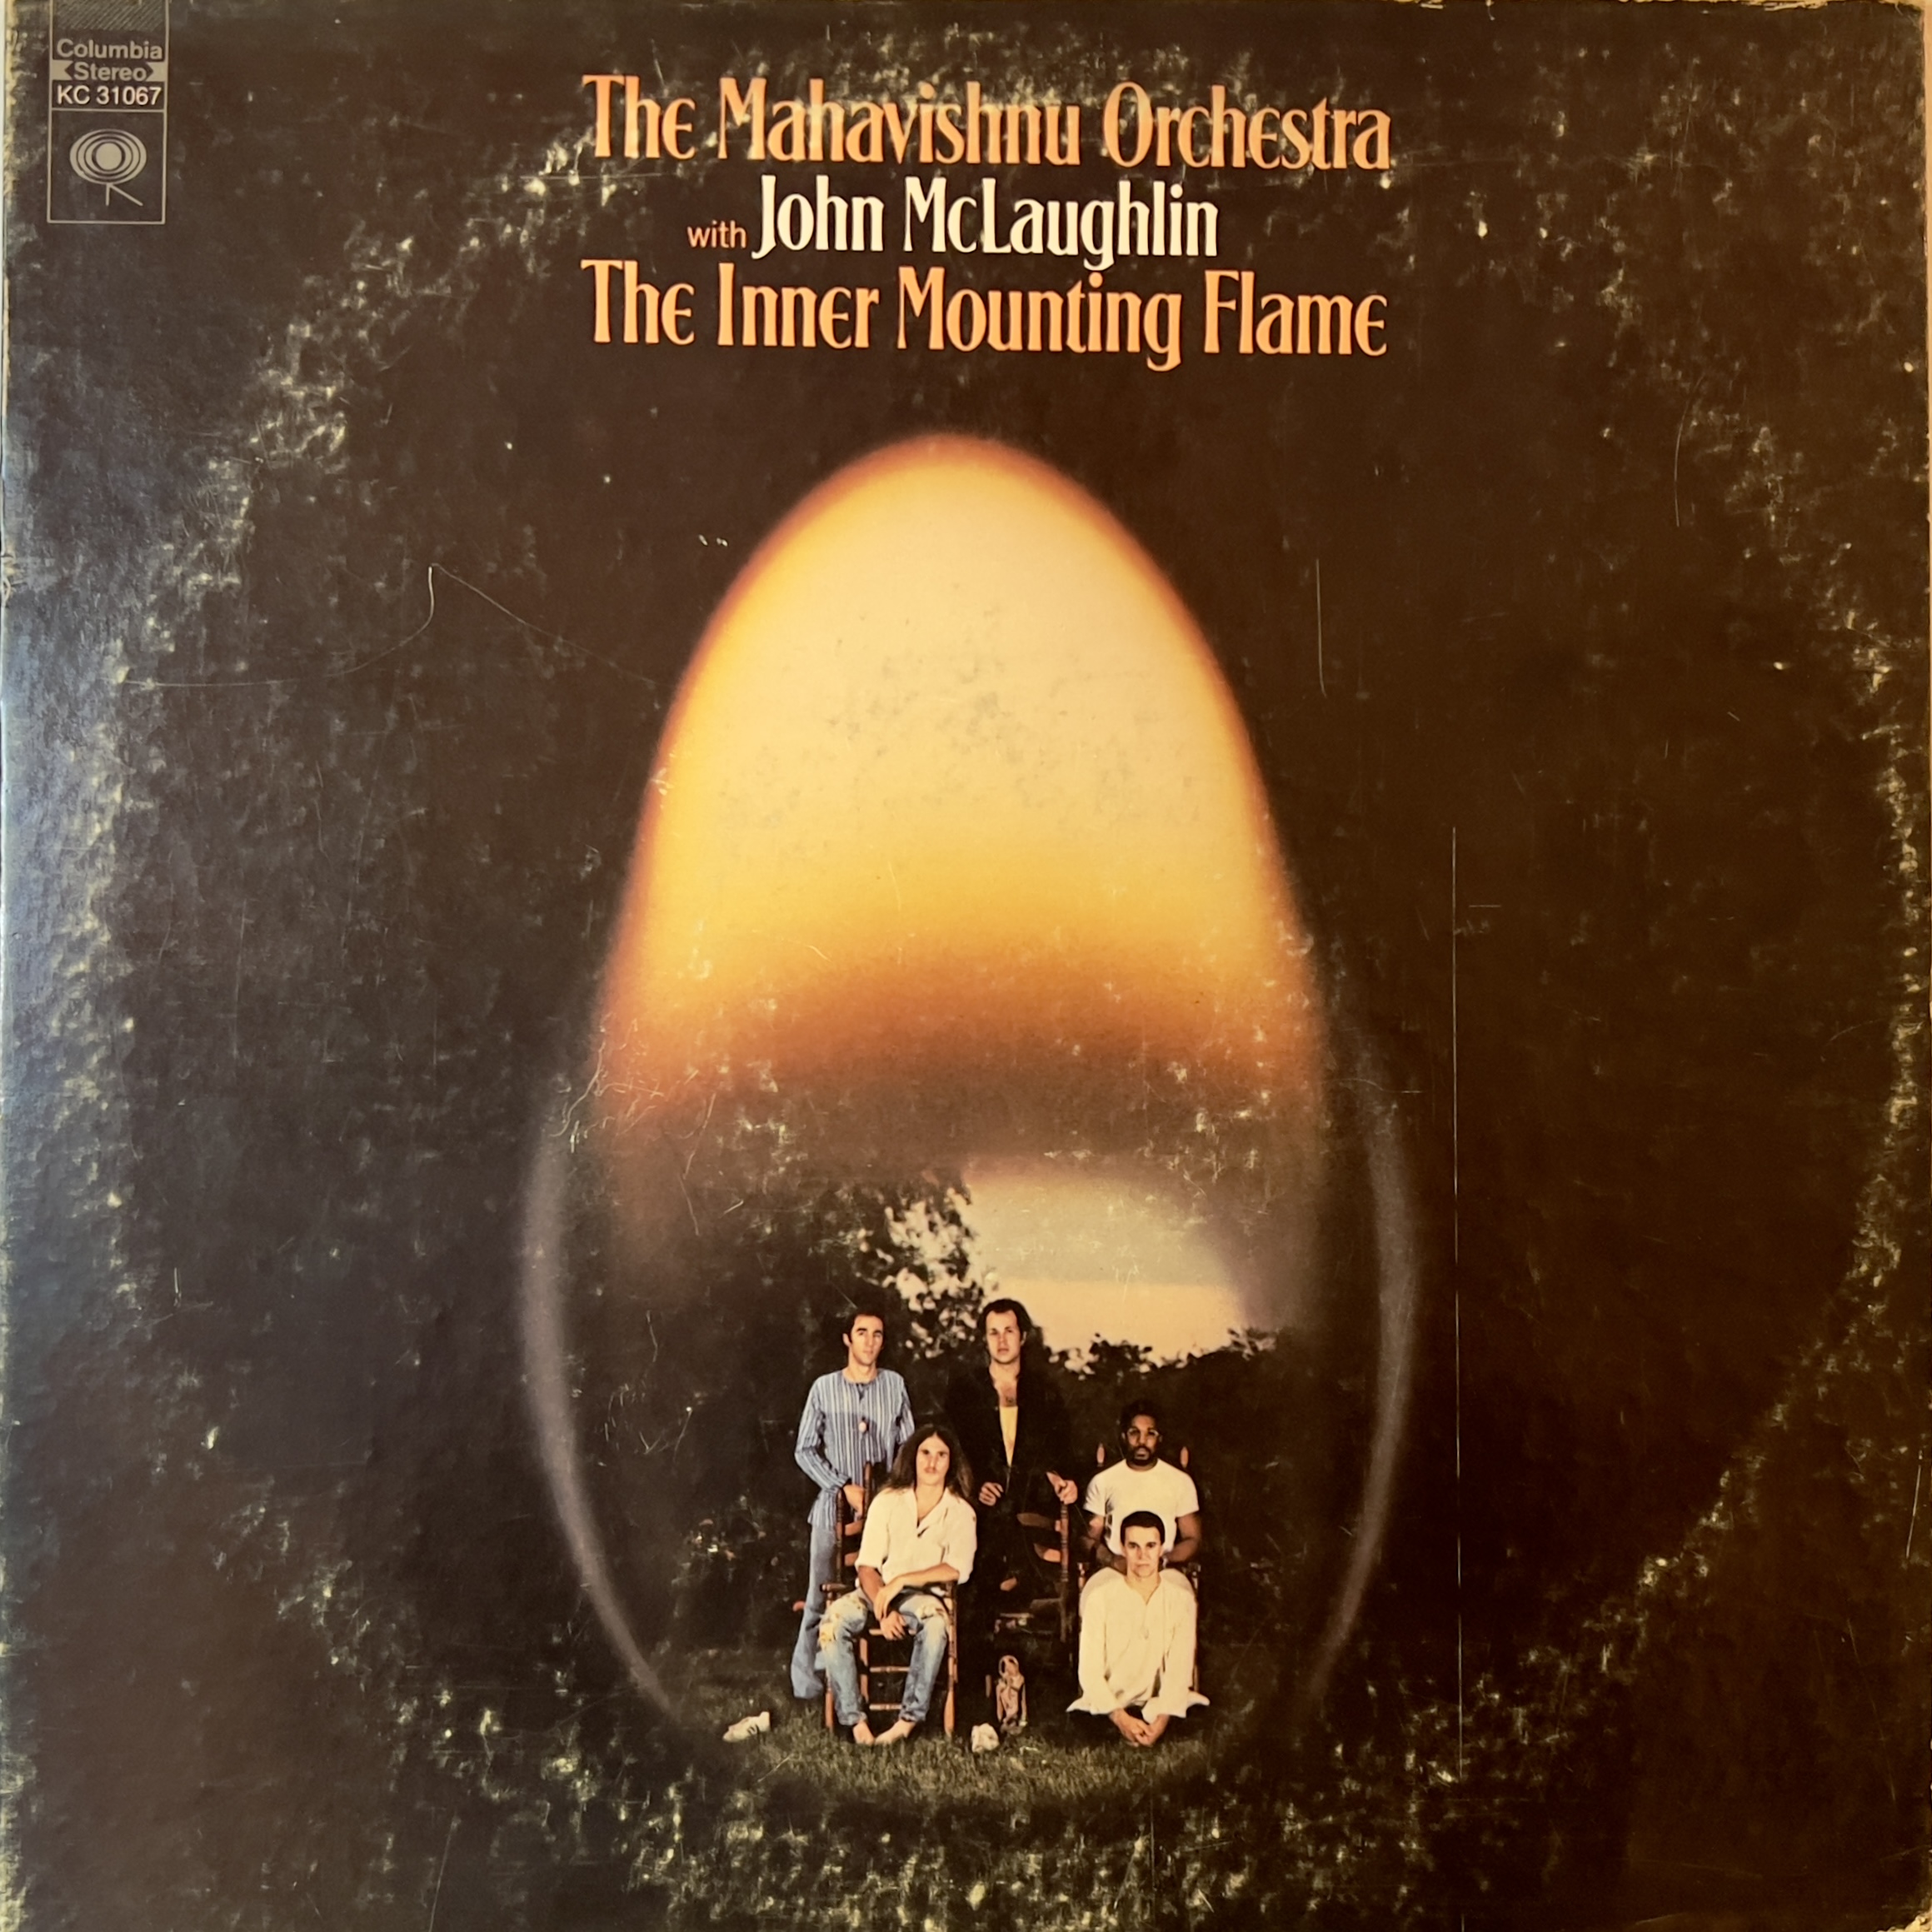 The Inner Mounting Flame by The Mahavishnu Orchestra with John McLaughlin